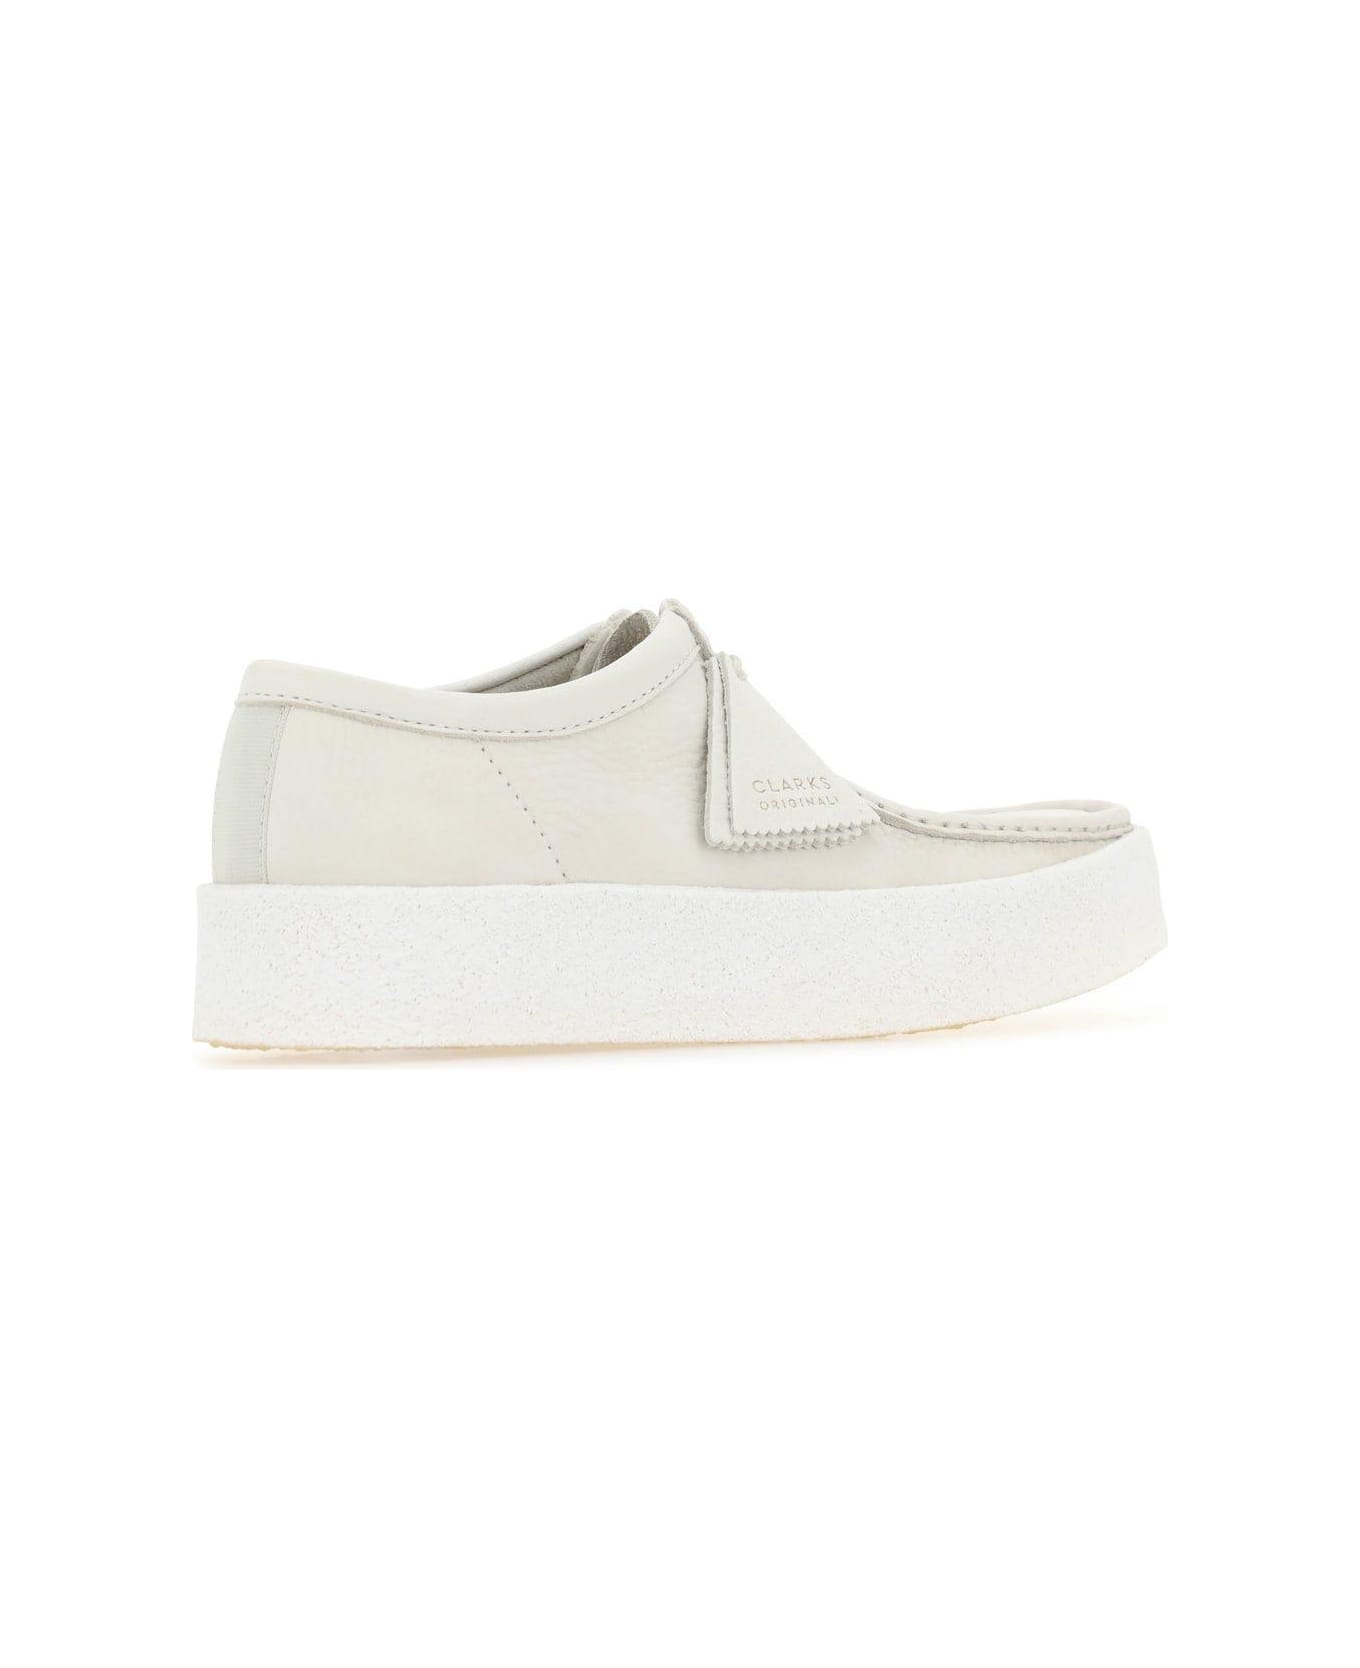 Clarks Sand Nubuck Wallabee Ankle Boots - White Nubuck ブーツ